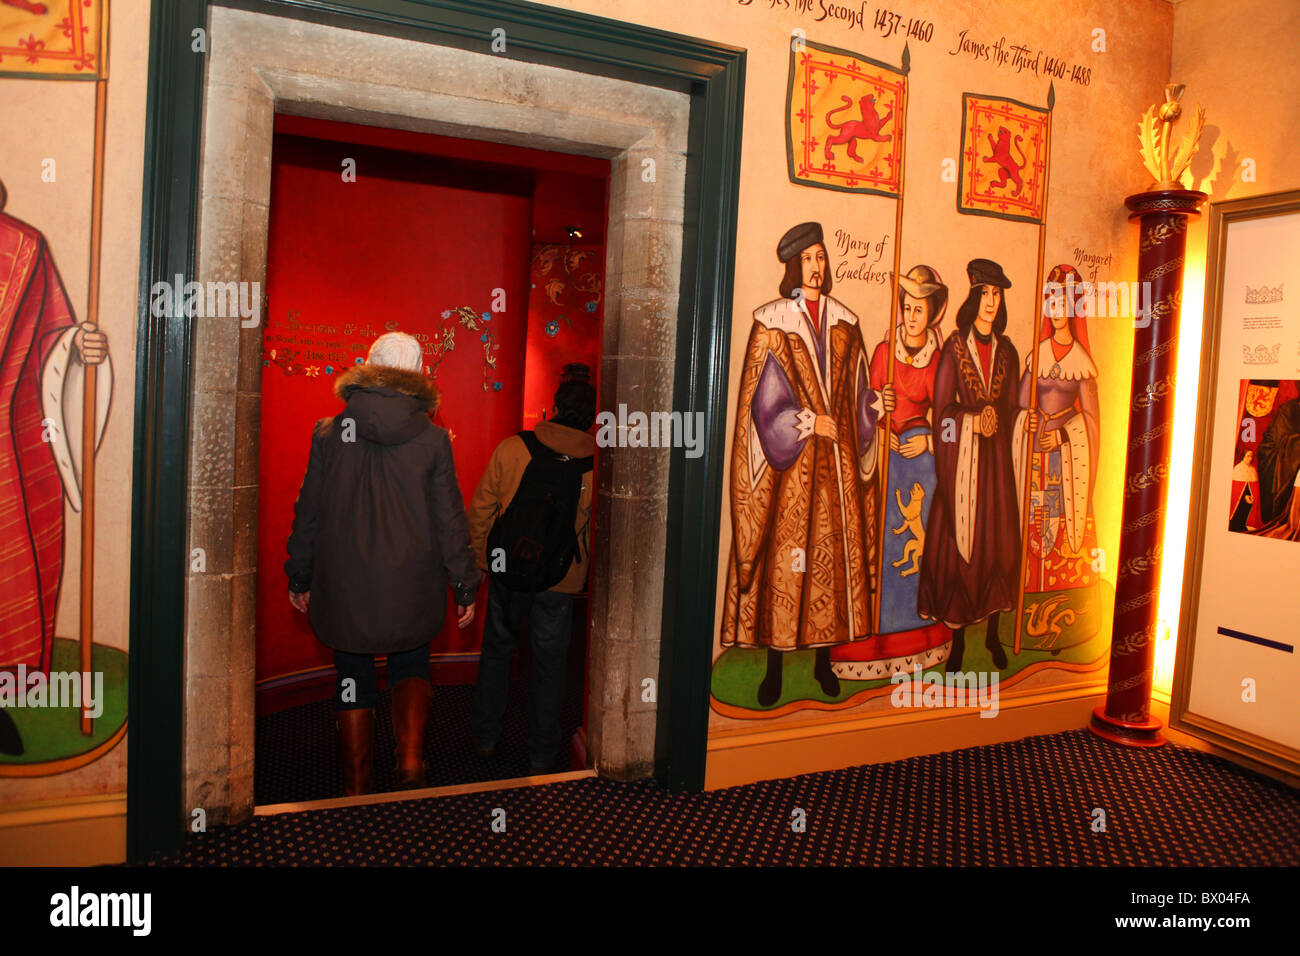 Inside Edinburgh Castle- The story  /exhibition of the Scottish crown jewels. Stock Photo